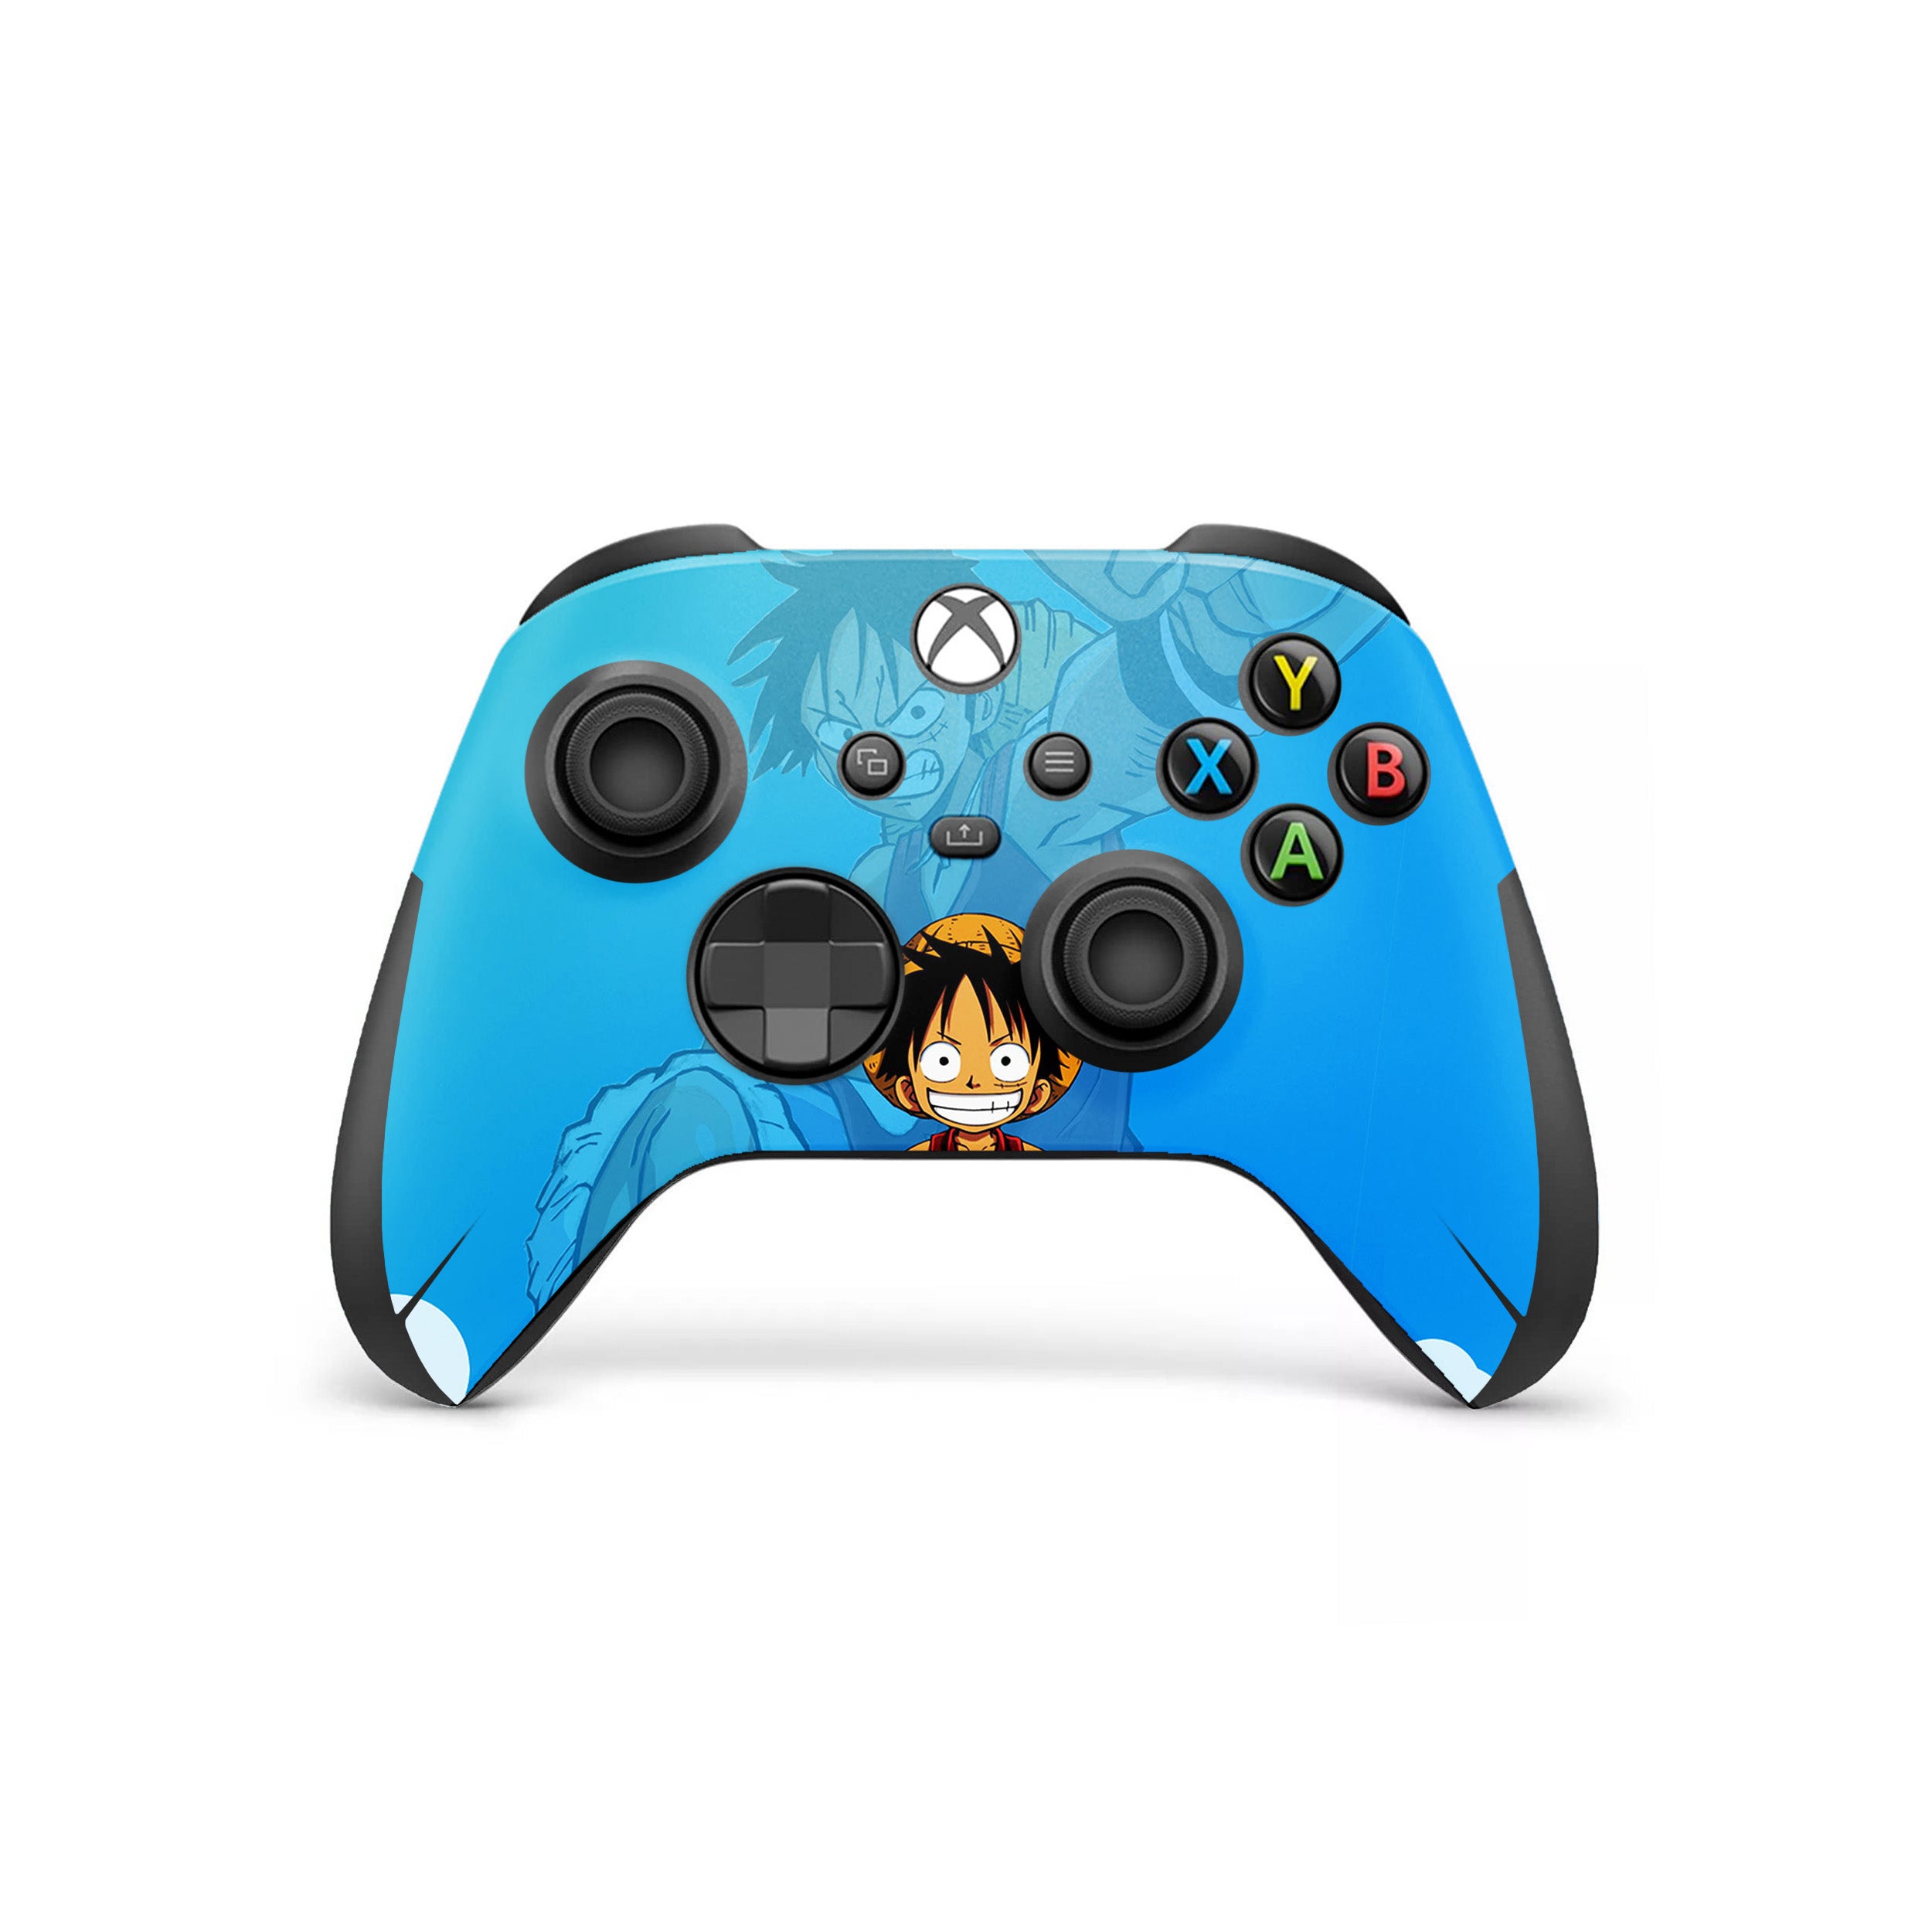 A video game skin featuring a One Piece Monkey D Luffy design for the Xbox Wireless Controller.